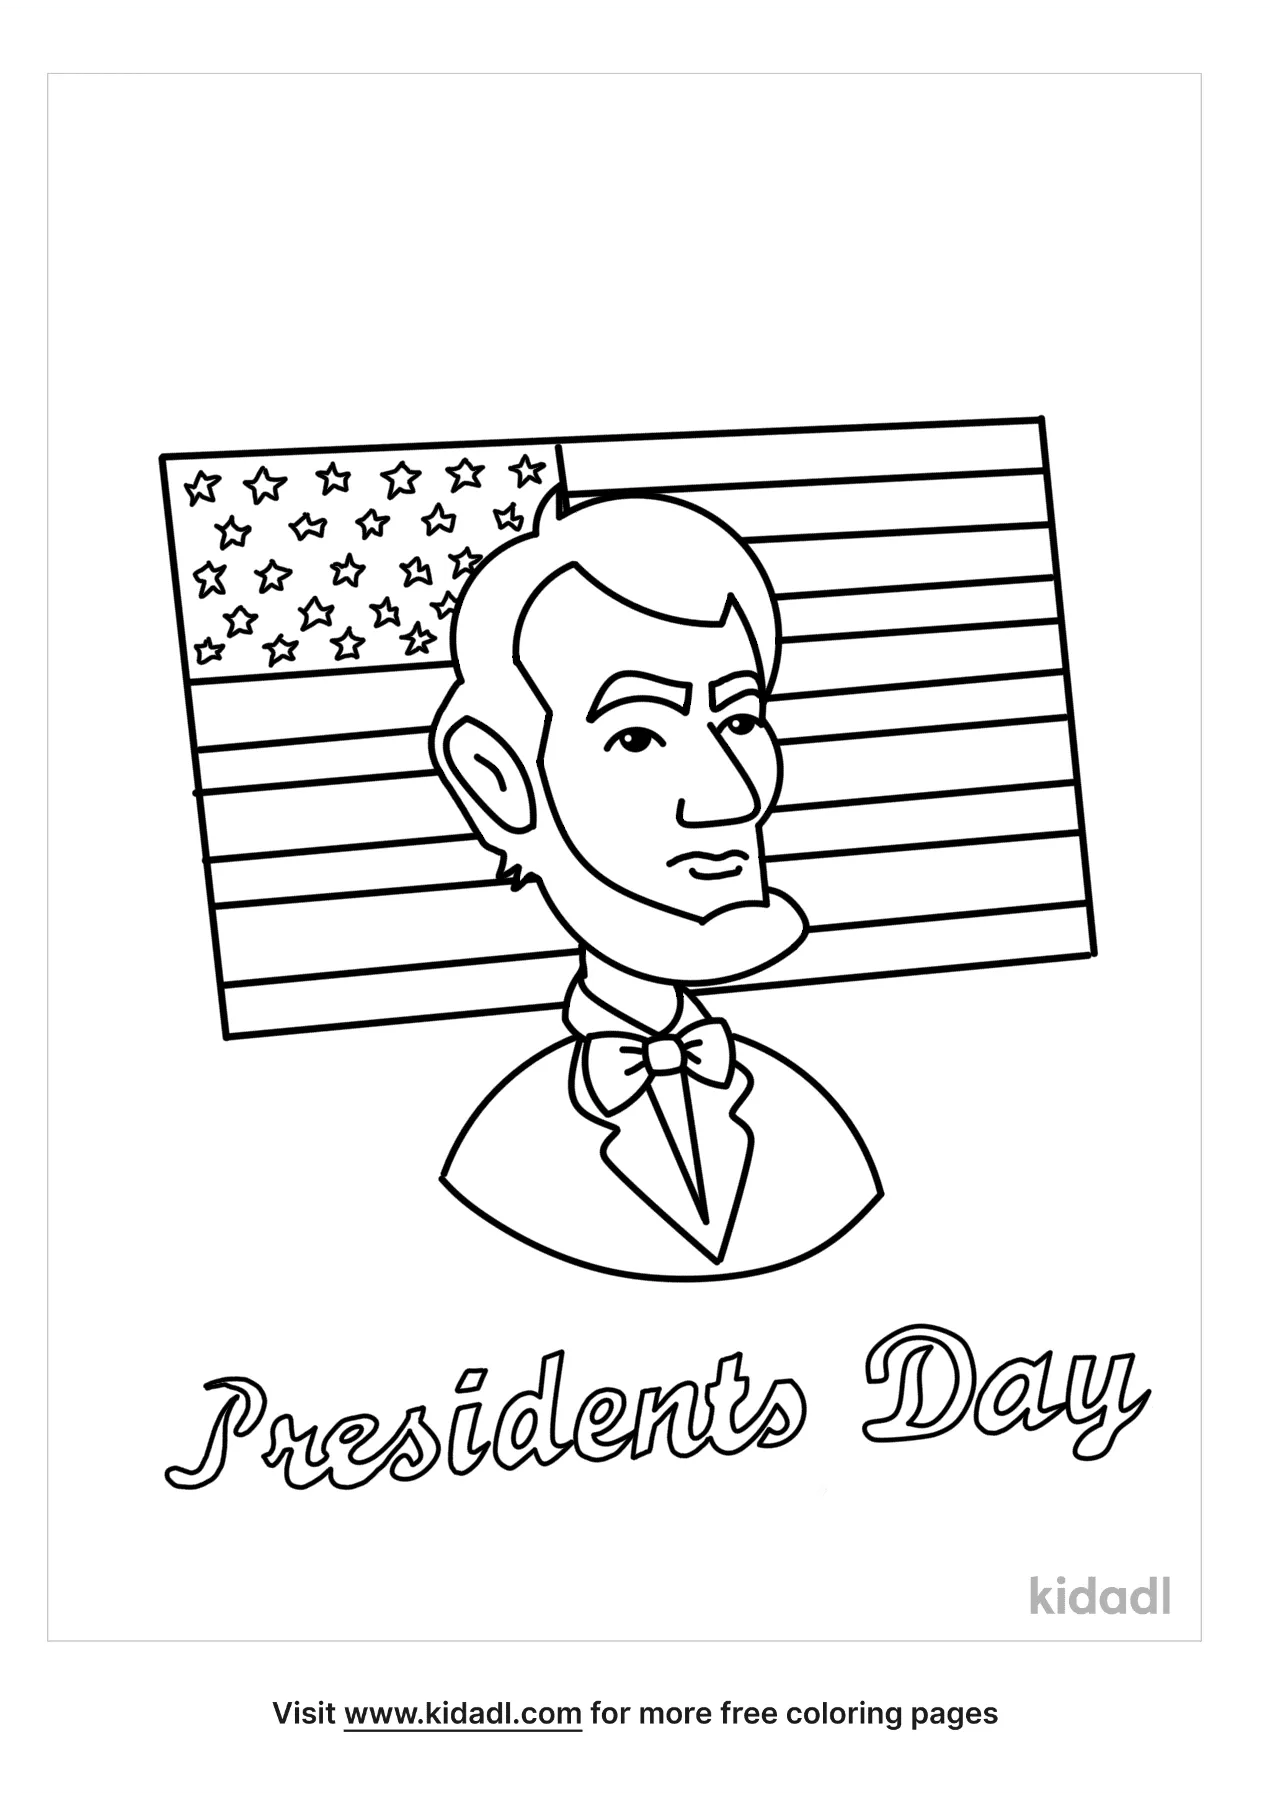 Free Presidents Day Coloring Page | Coloring Page Printables | Kidadl